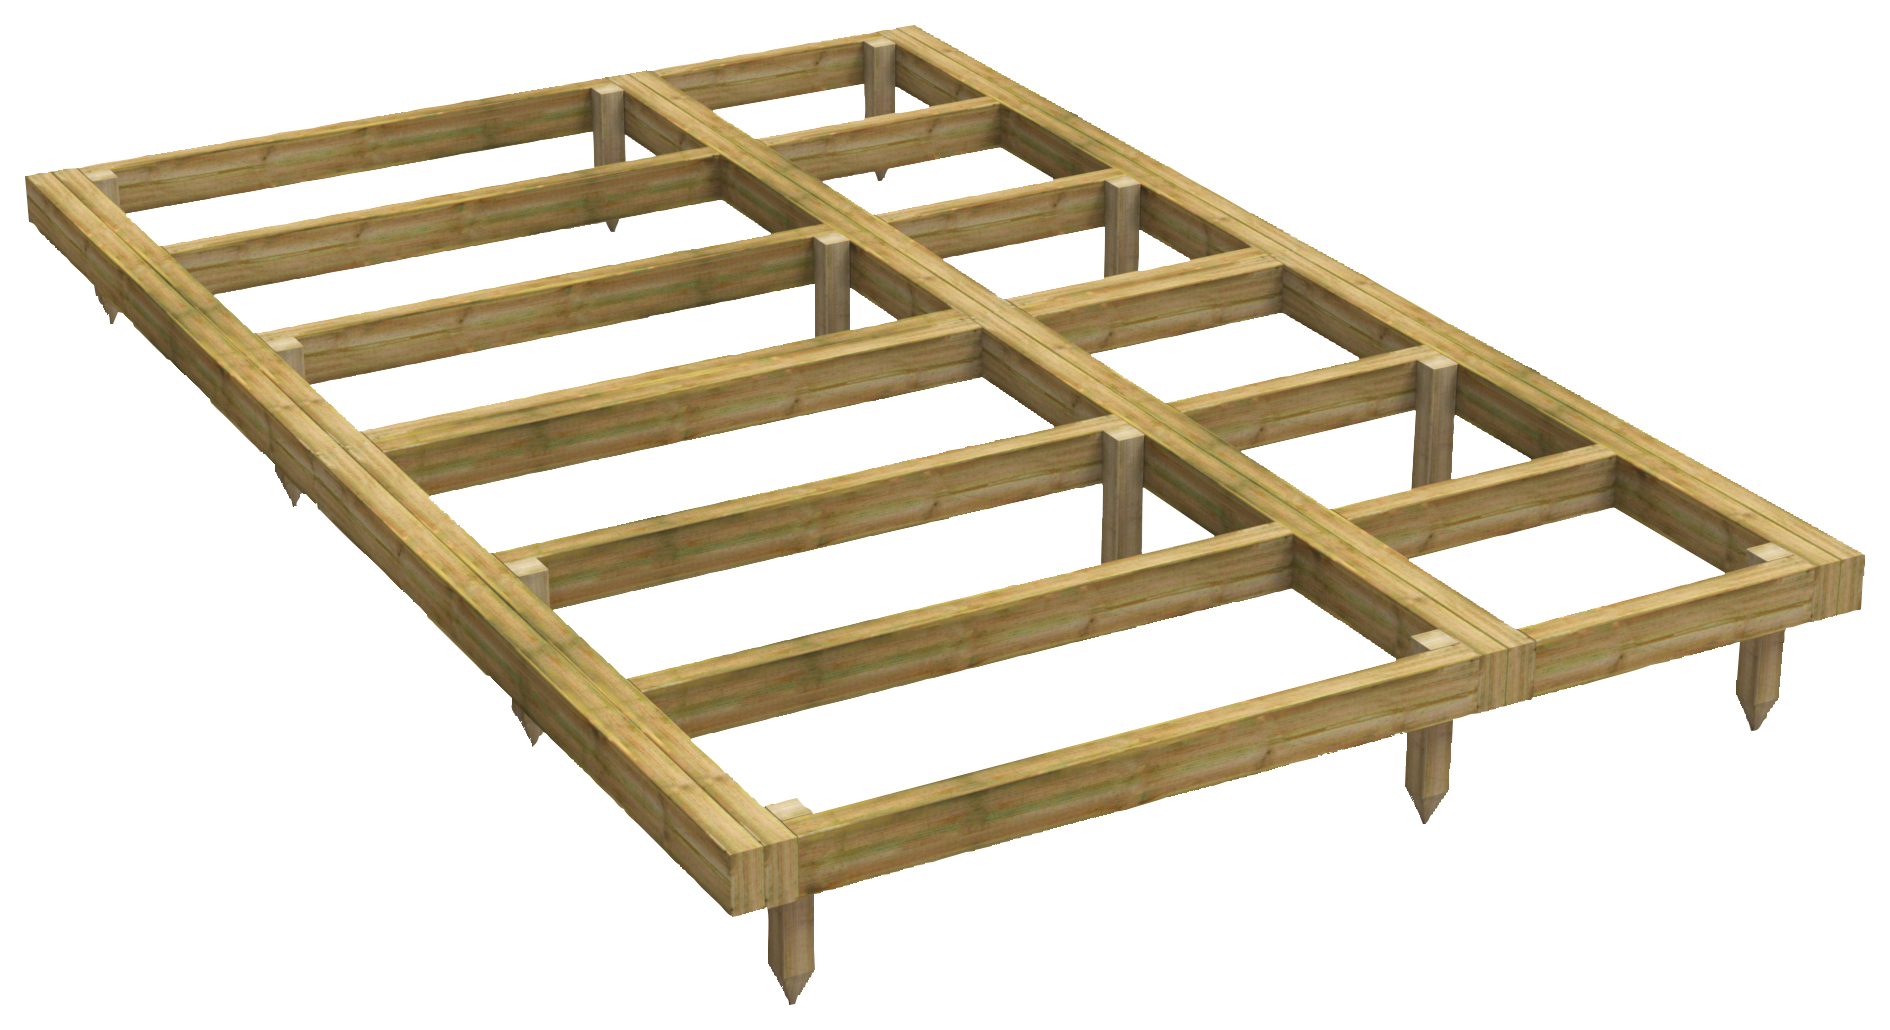 Image of Power Sheds 6 x 10ft Pressure Treated Garden Building Base Kit